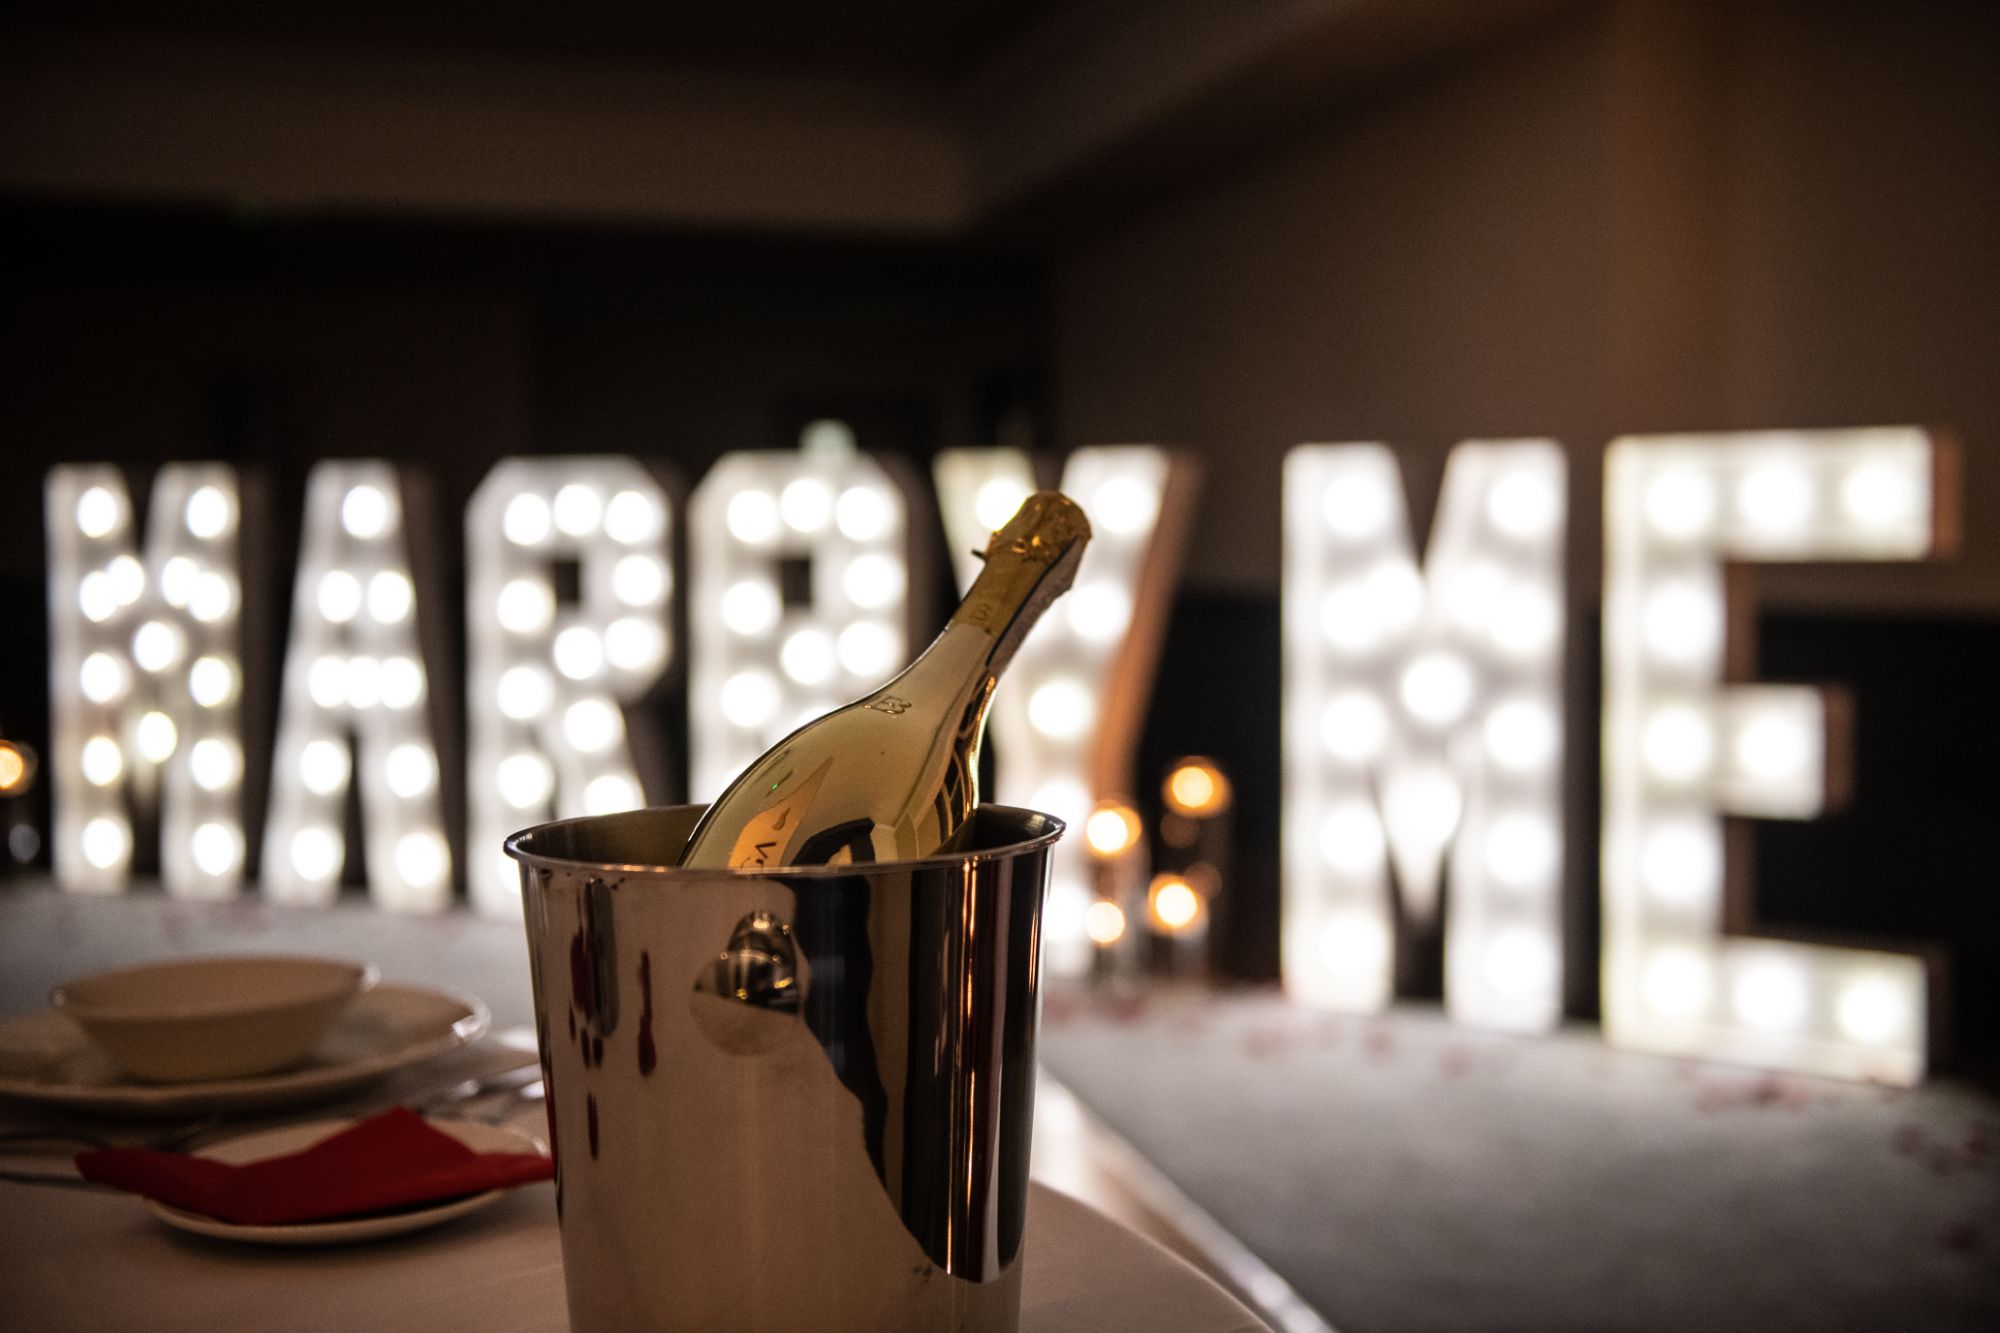 Marry Me Light Up Letters with Bottega Gold Prosecco in ice bucket in the foreground.jpg